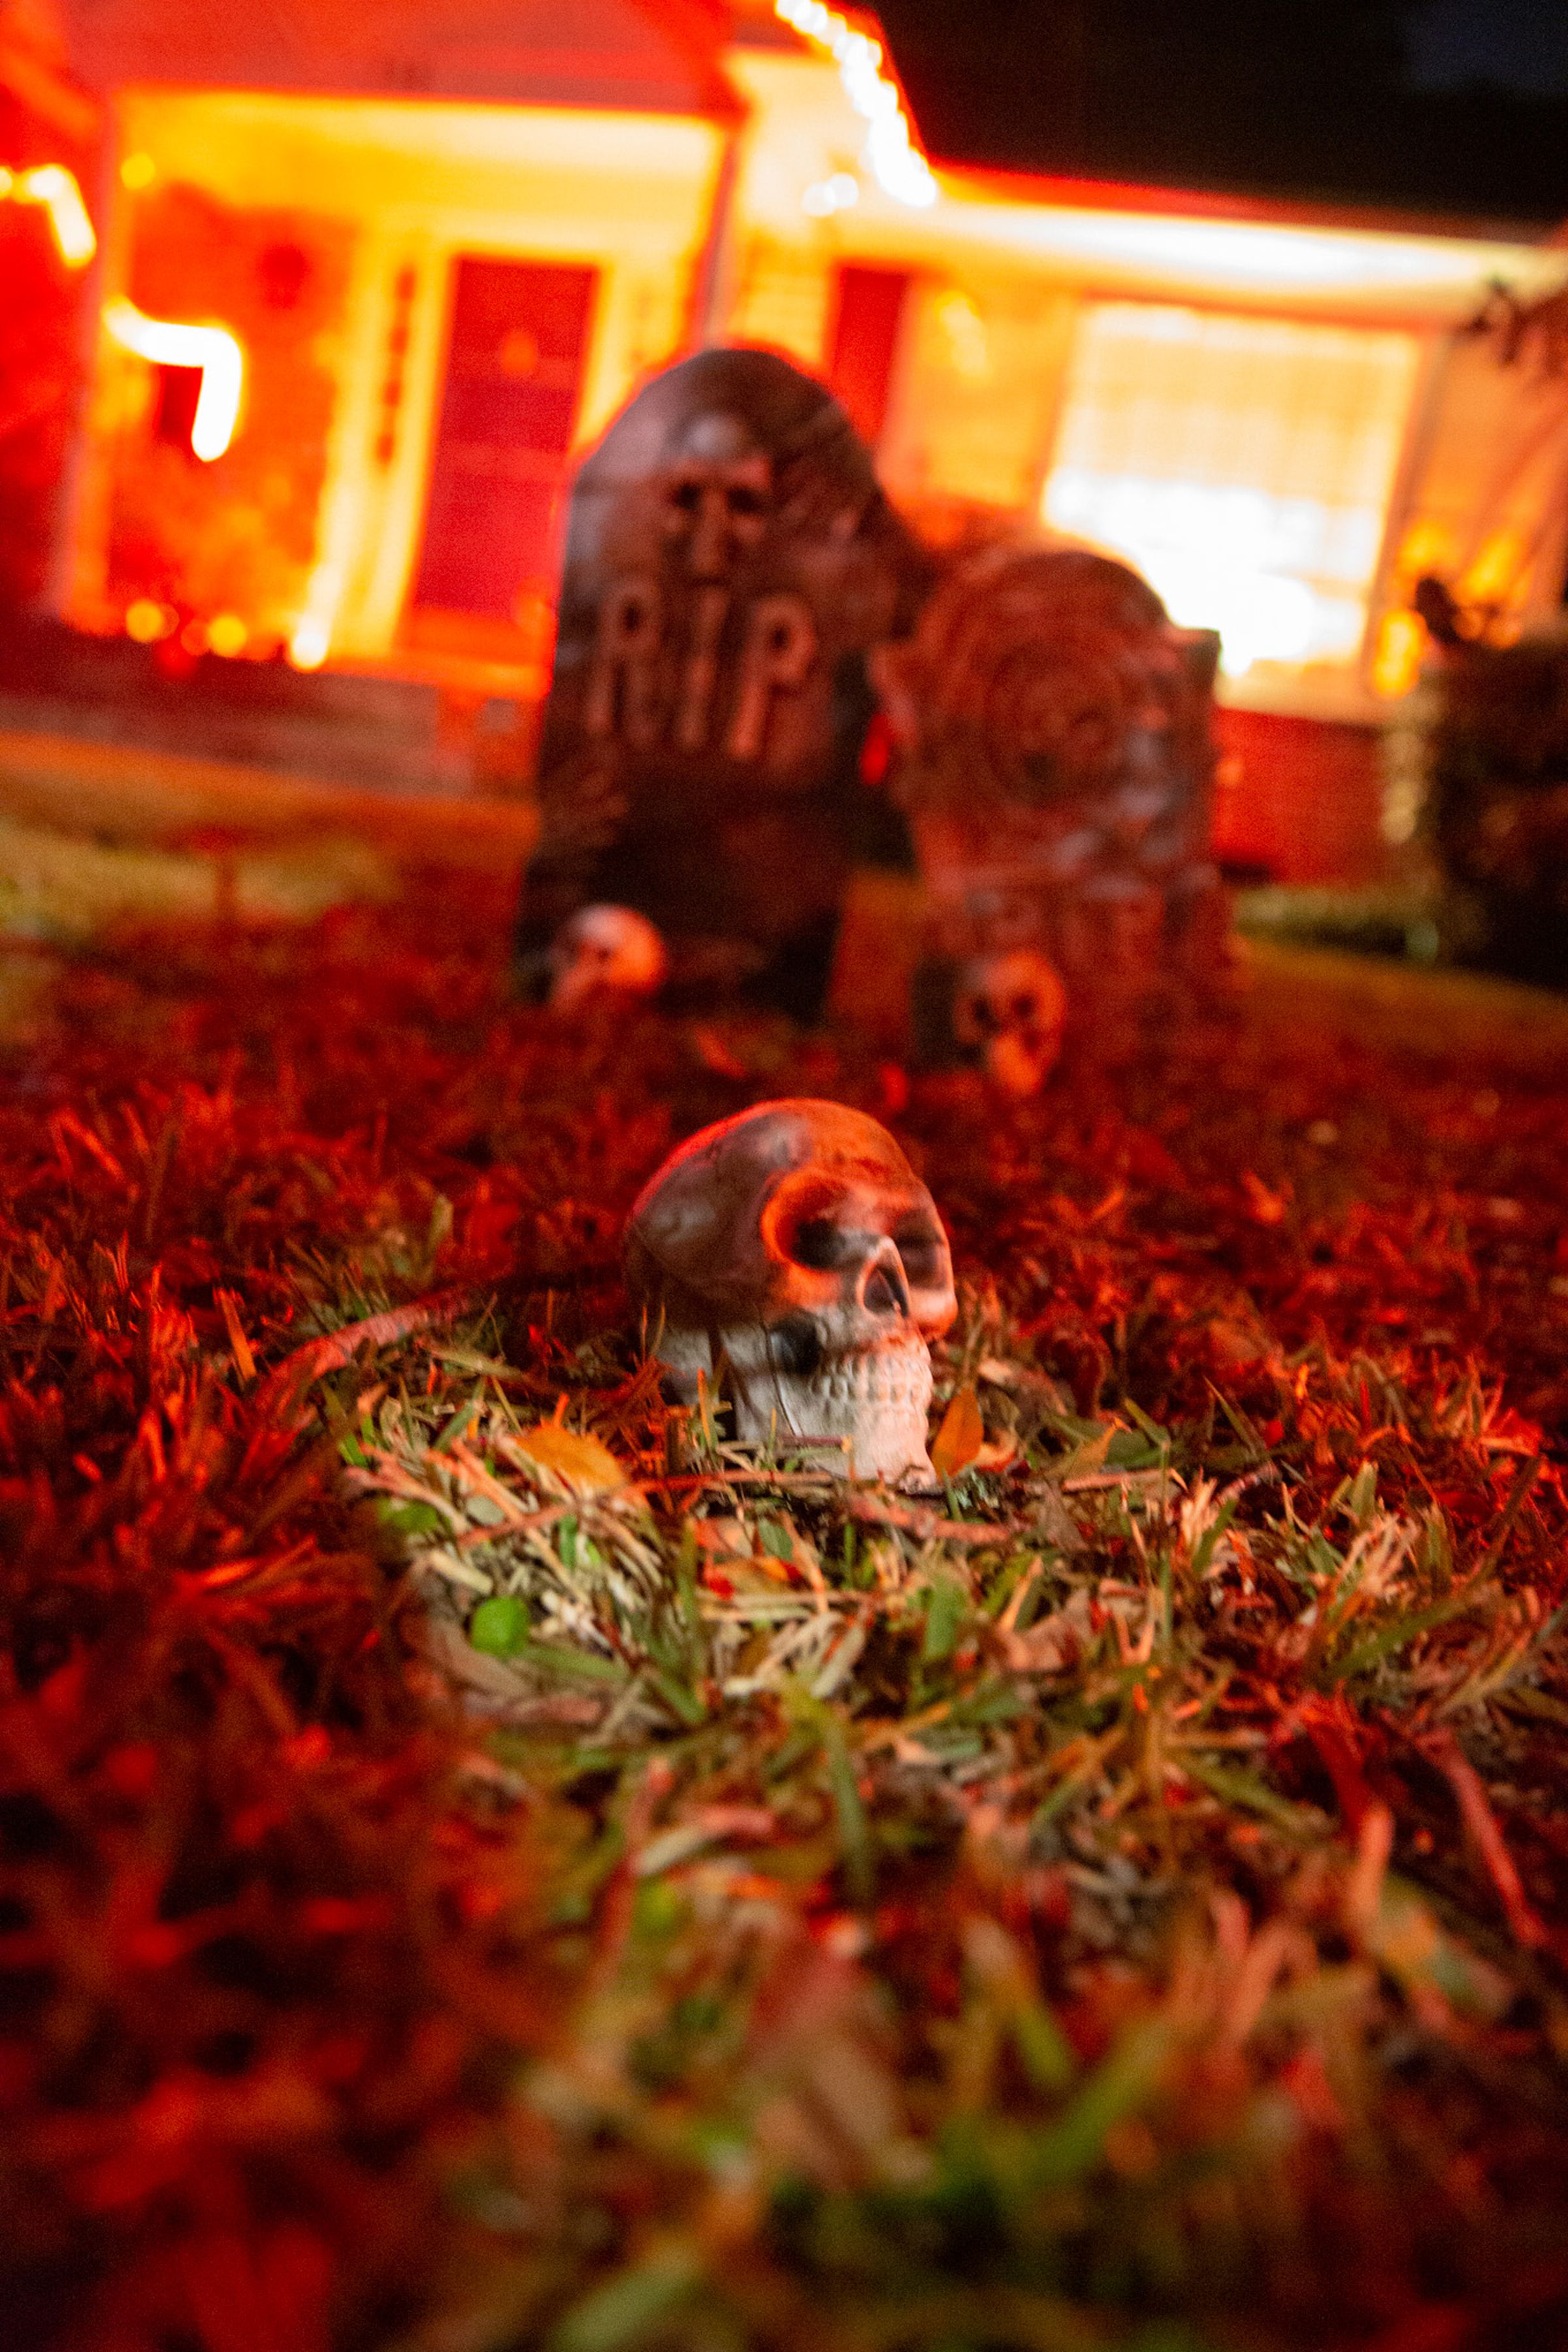 A plastic skull in front of fake graves in a front yard